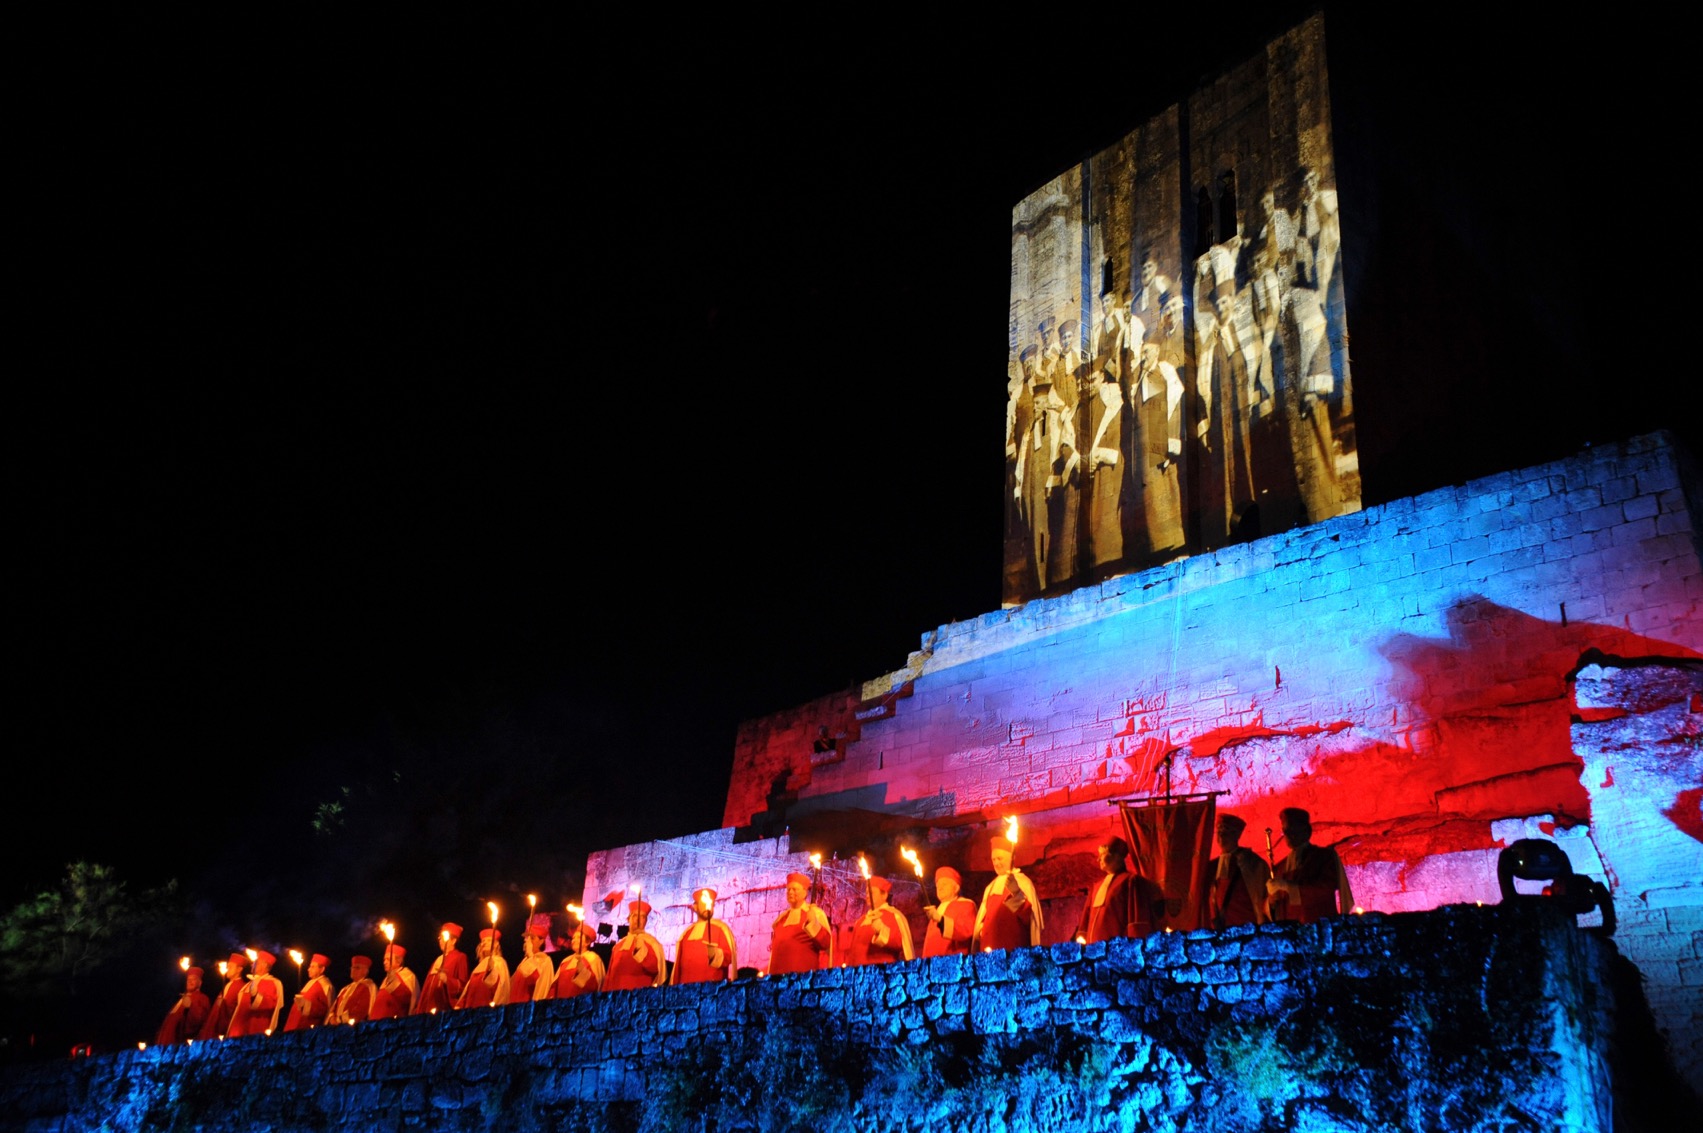 The Jurade at the Tour du Roi with torches